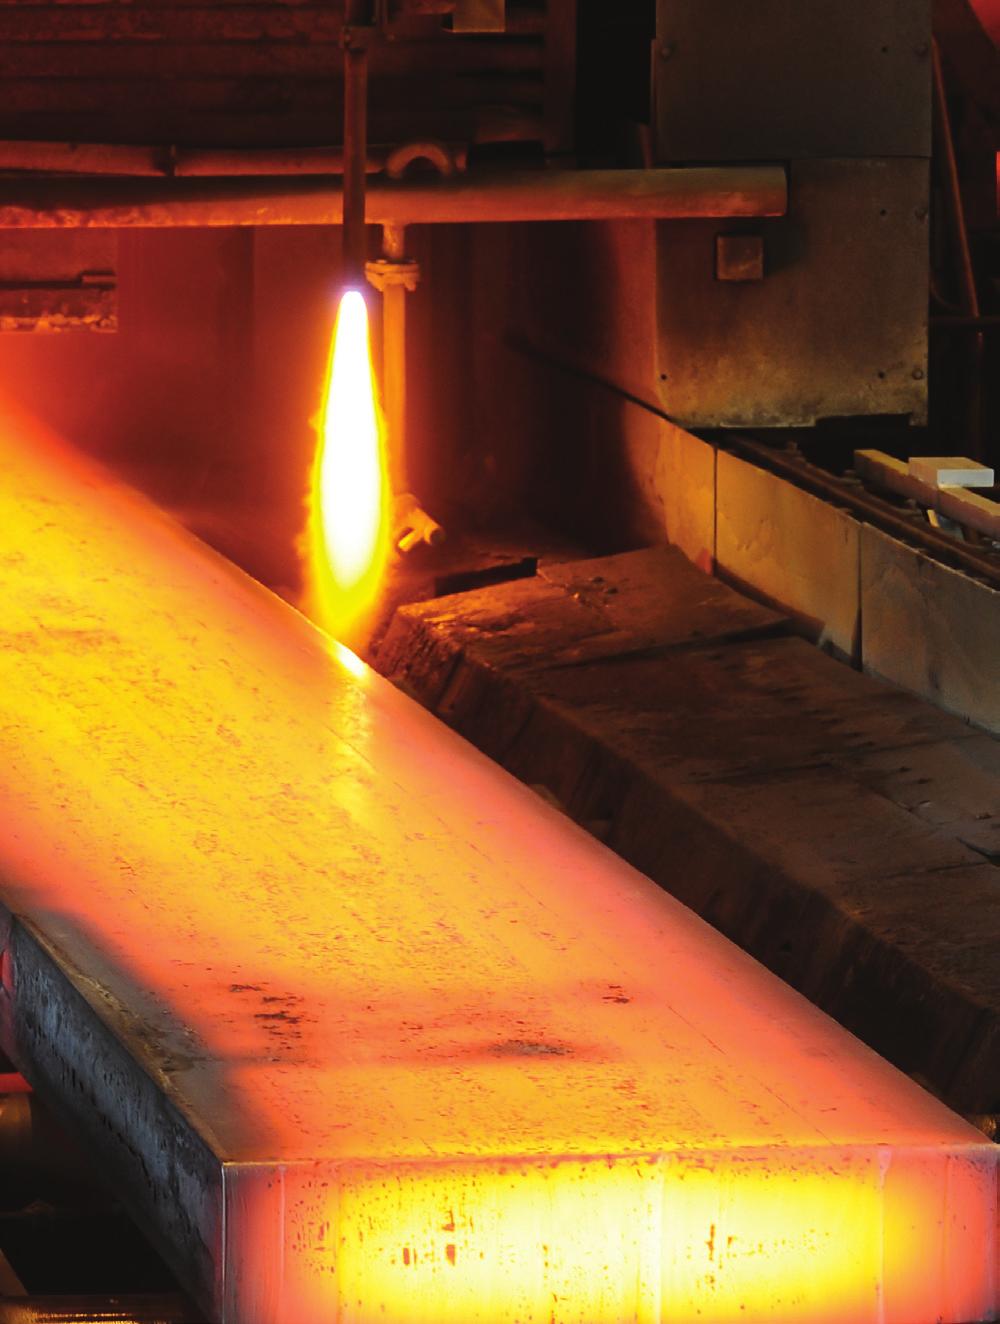 ALLOYS MAKE THE GRADE The manufacture of quality stainless steel, from heat to heat and year to year, demands precise control of raw material ingredients and melting practices.